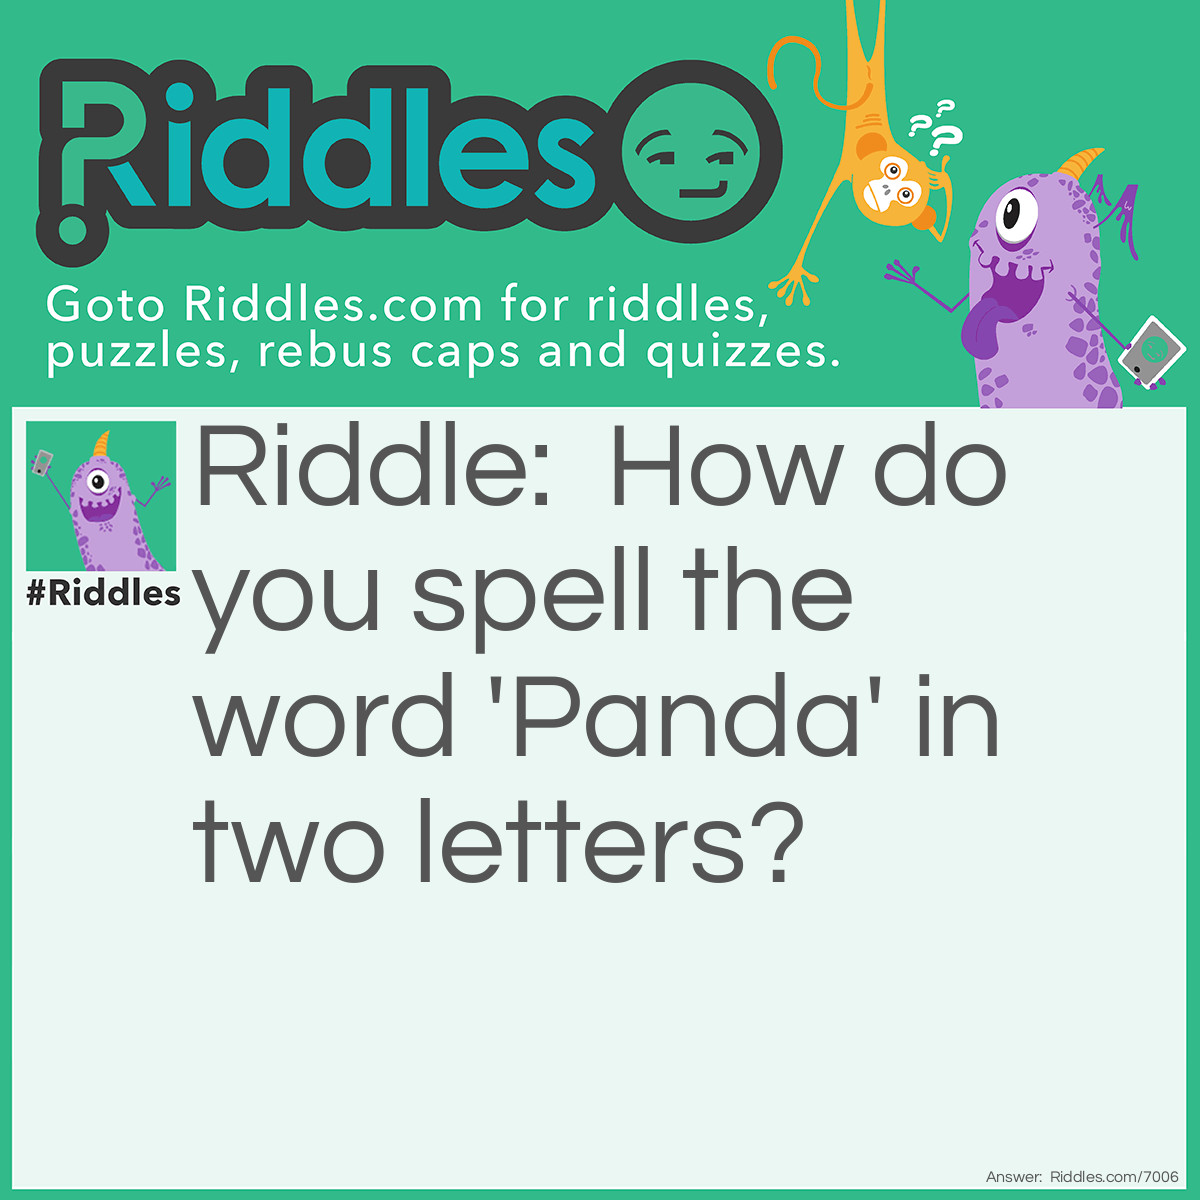 Riddle: How do you spell the word 'Panda' in two letters? Answer: P and A P(and)a.